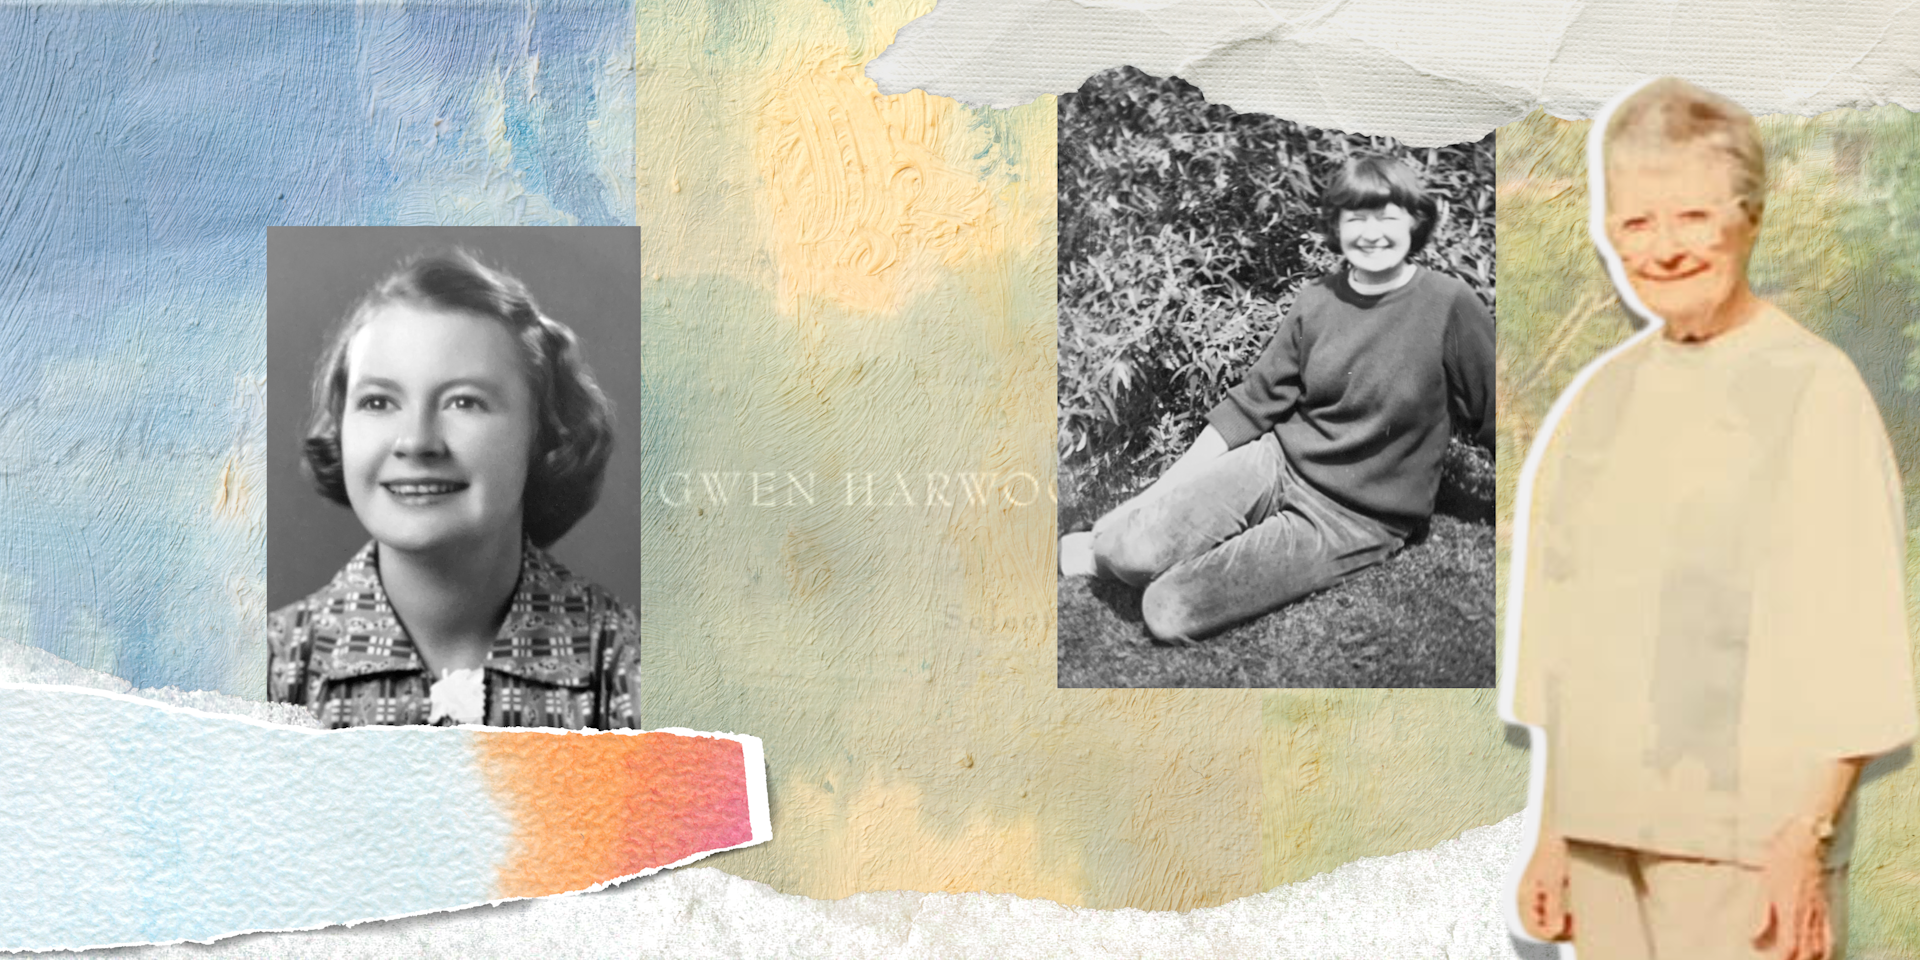 A sexual radical at 17 and 70, Gwen Harwoods frank erotic poetry reflected an ardent life